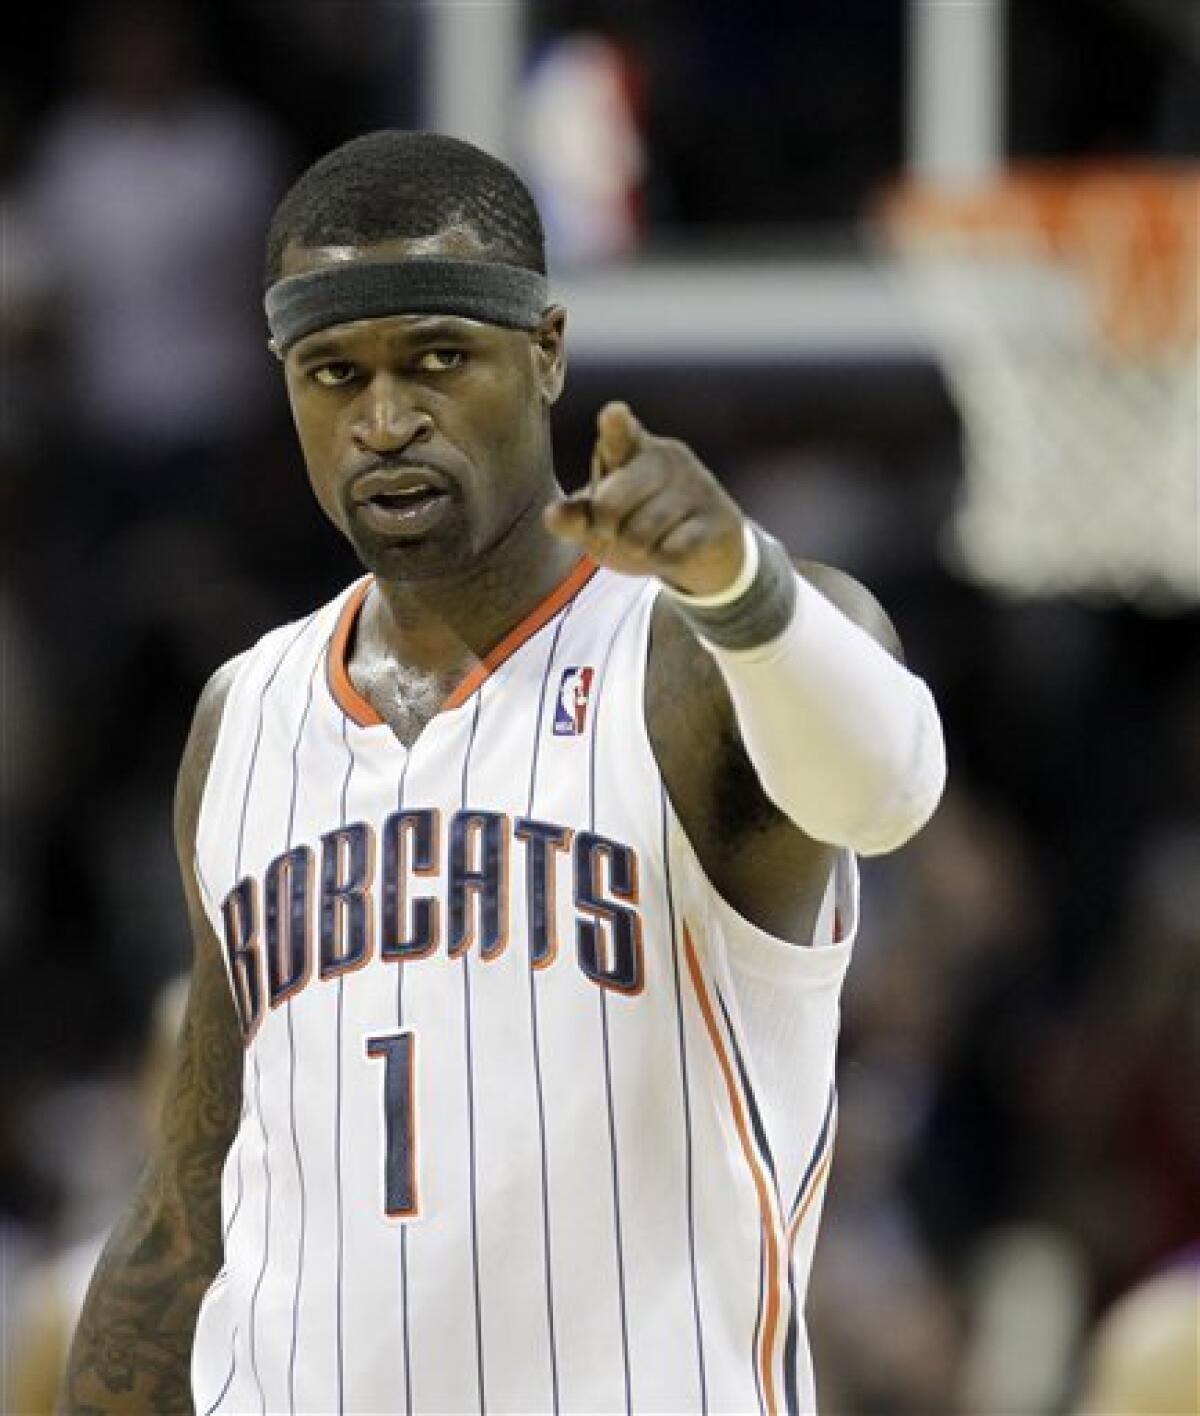 FILE - In this March 26, 2011, file photo, Charlotte Bobcats' Stephen Jackson points to the crowd in the final seconds of an NBA basketball game against the New York Knicks in Charlotte, N.C. The Bobcats have agreed to send Jackson to the Milwaukee Bucks in a three-team trade, a person familiar with the deal told The Associated Press on Thursday, June 23, 2011 on condition of anonymity. (AP Photo/Chuck Burton, File)